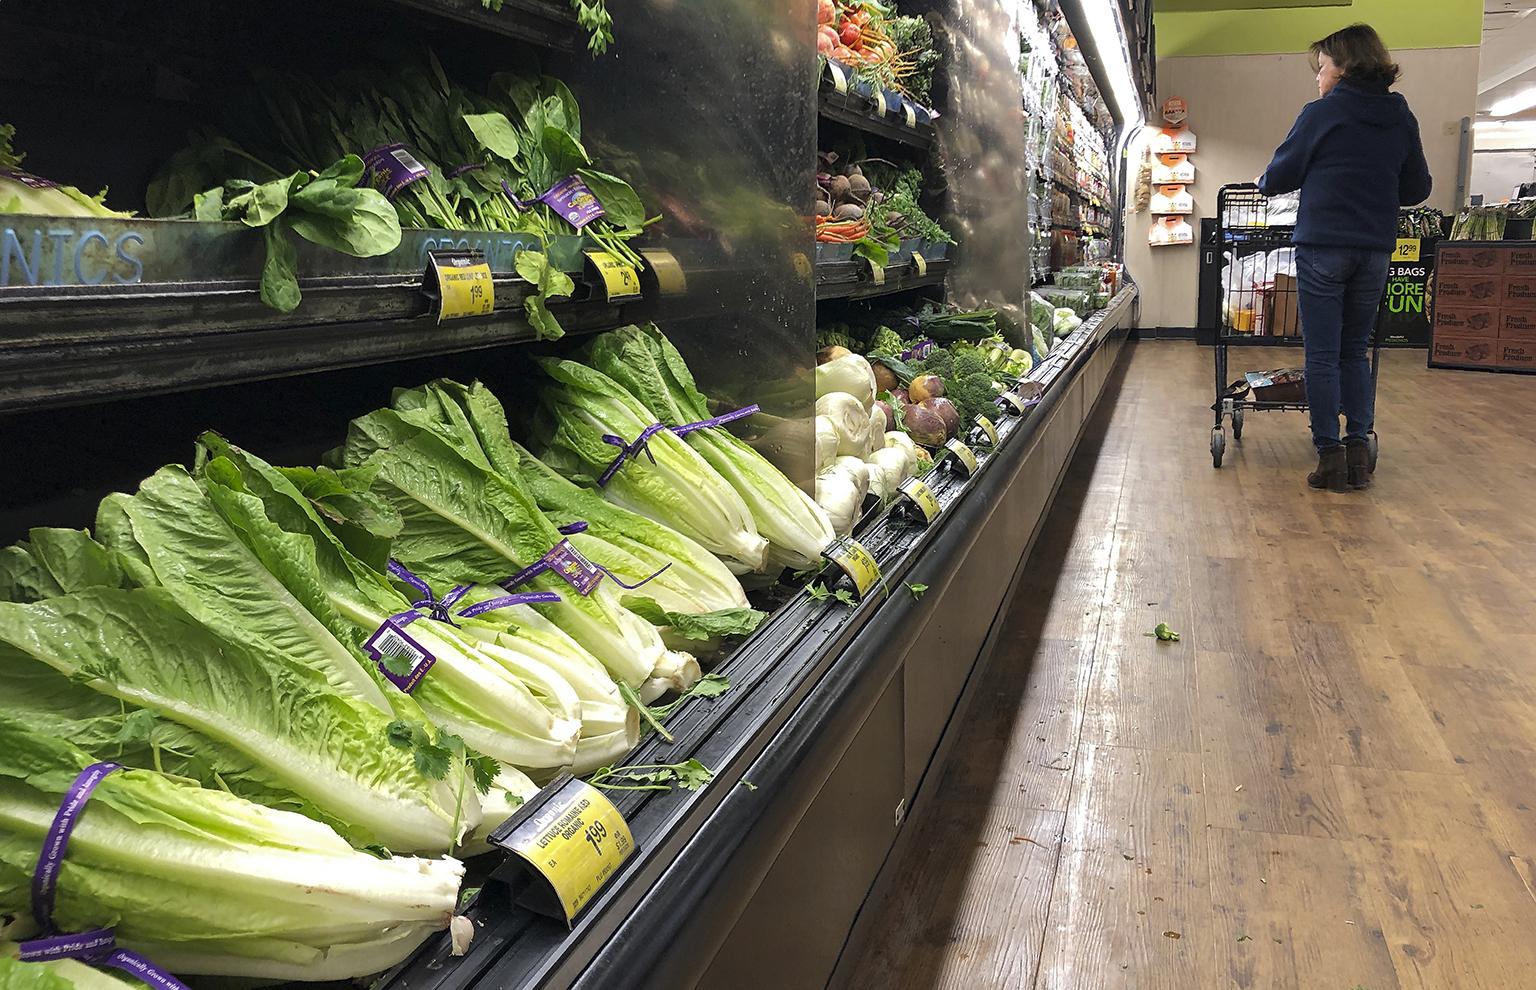 Romaine lettuce still sits on the shelves as a shopper walks through the produce area of an Albertsons market Tuesday, Nov. 20, 2018, in Simi Valley, Calif. Health officials in the U.S. and Canada told people Tuesday to stop eating romaine lettuce because of a new E. coli outbreak. (Mark J. Terrill / AP Photo)